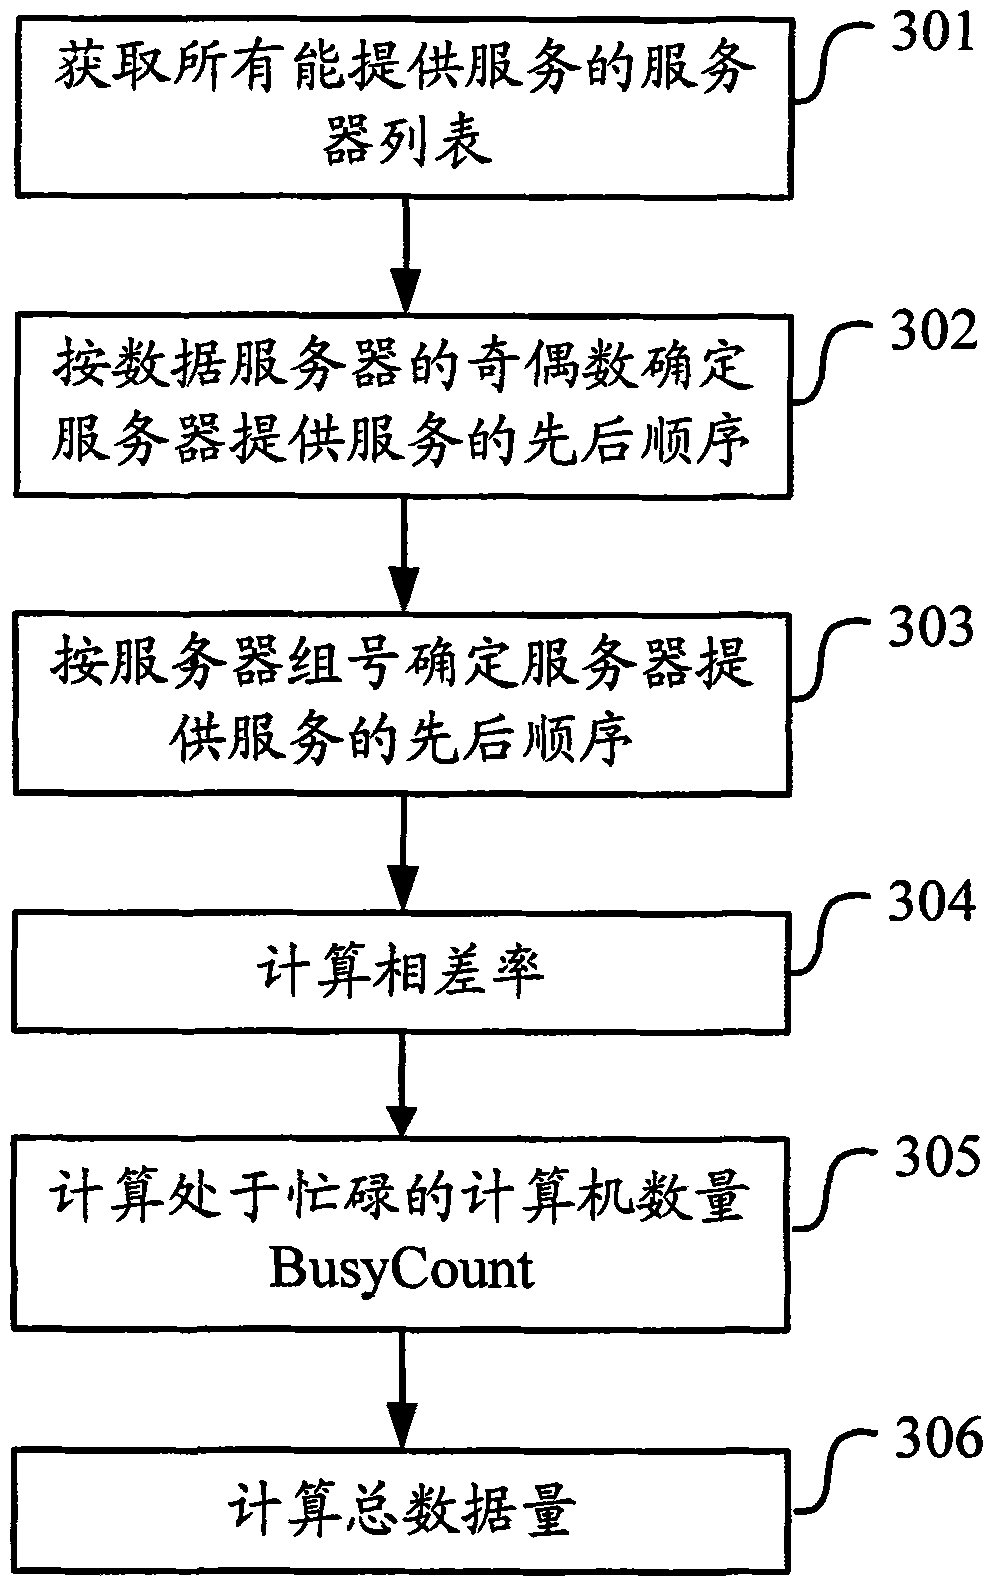 Load balancing method and equipment for data resources of servers